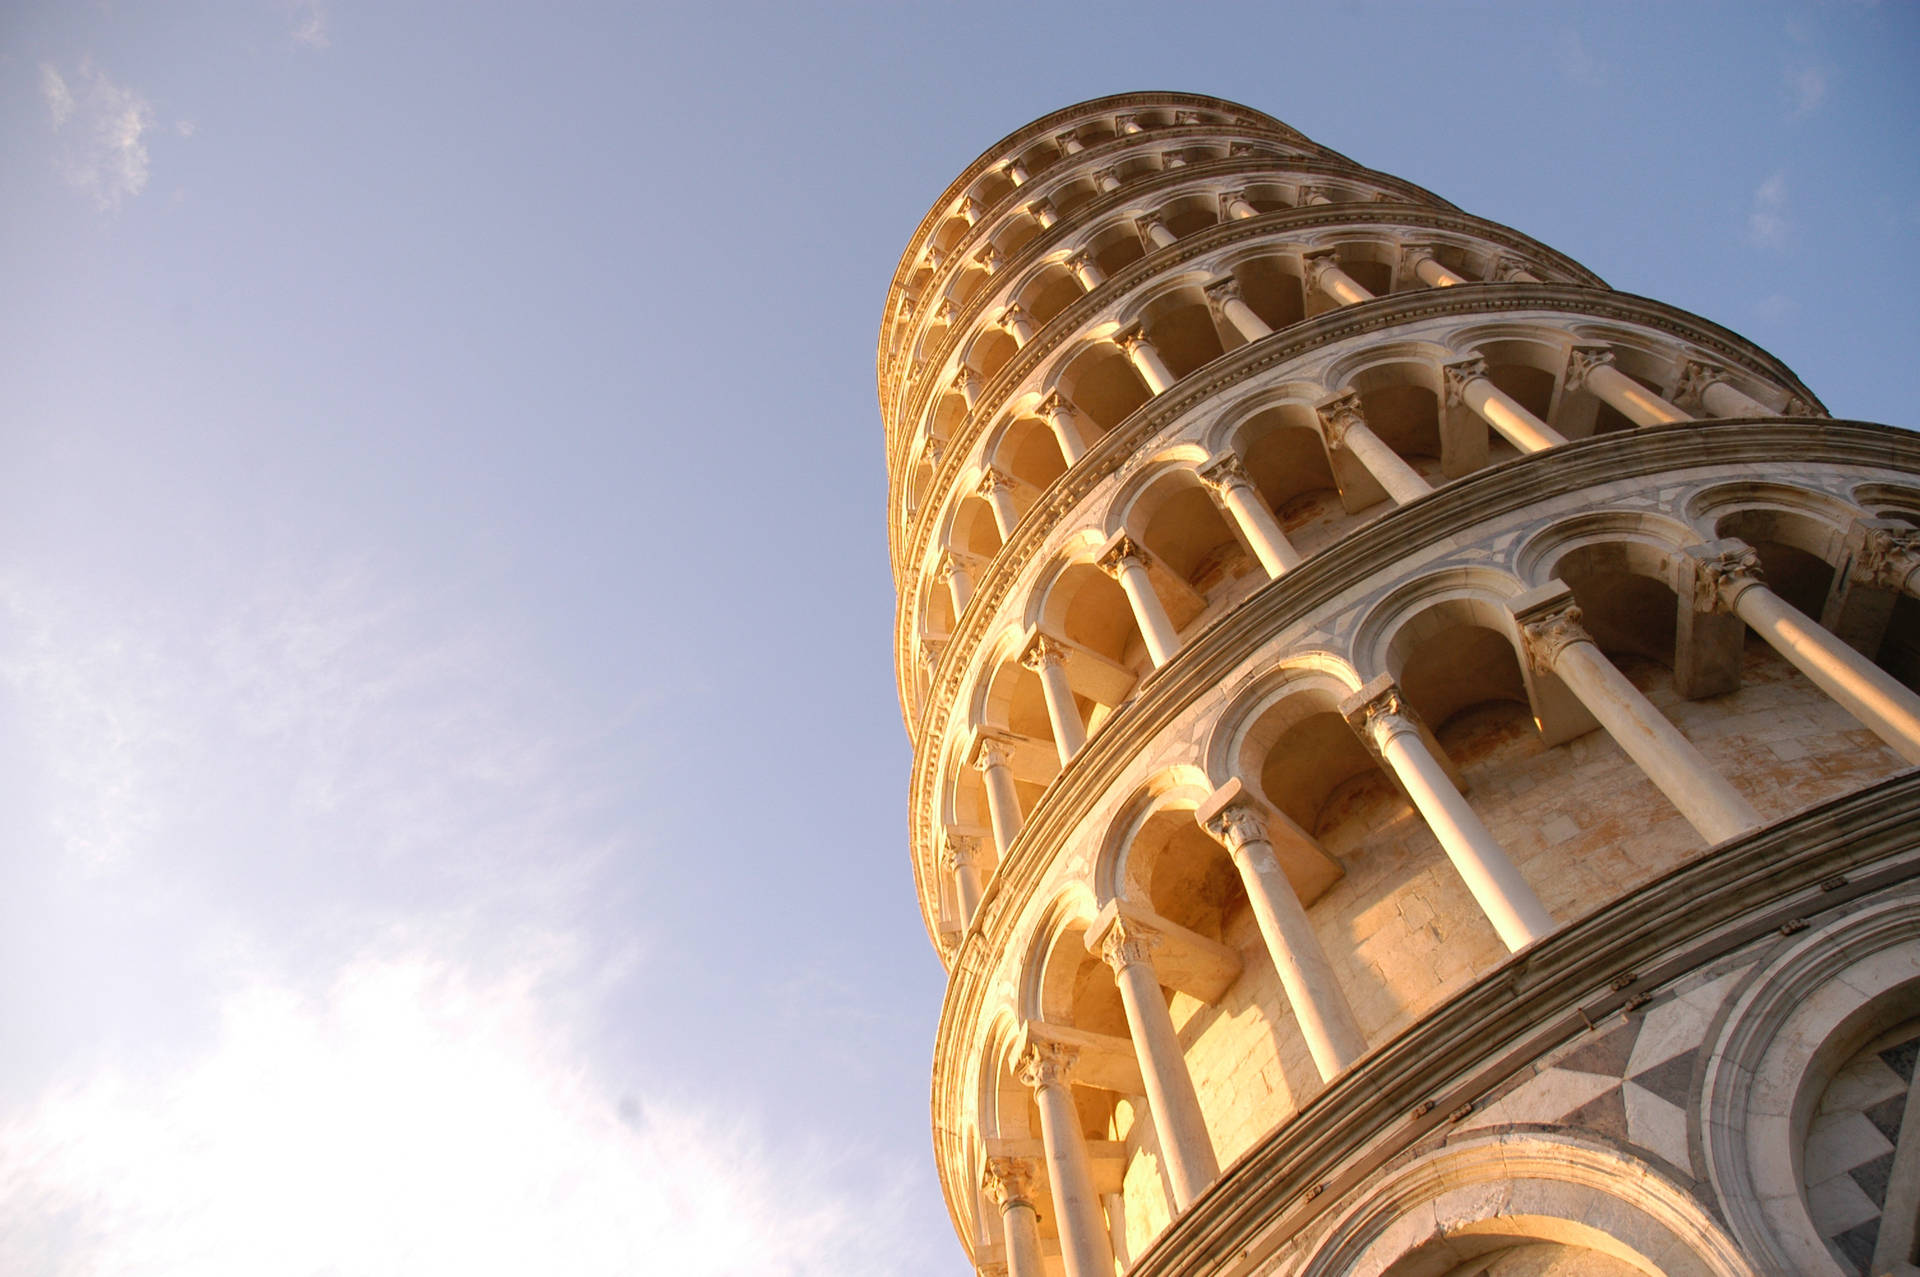 Dynamic Leaning Tower Of Pisa Wallpaper